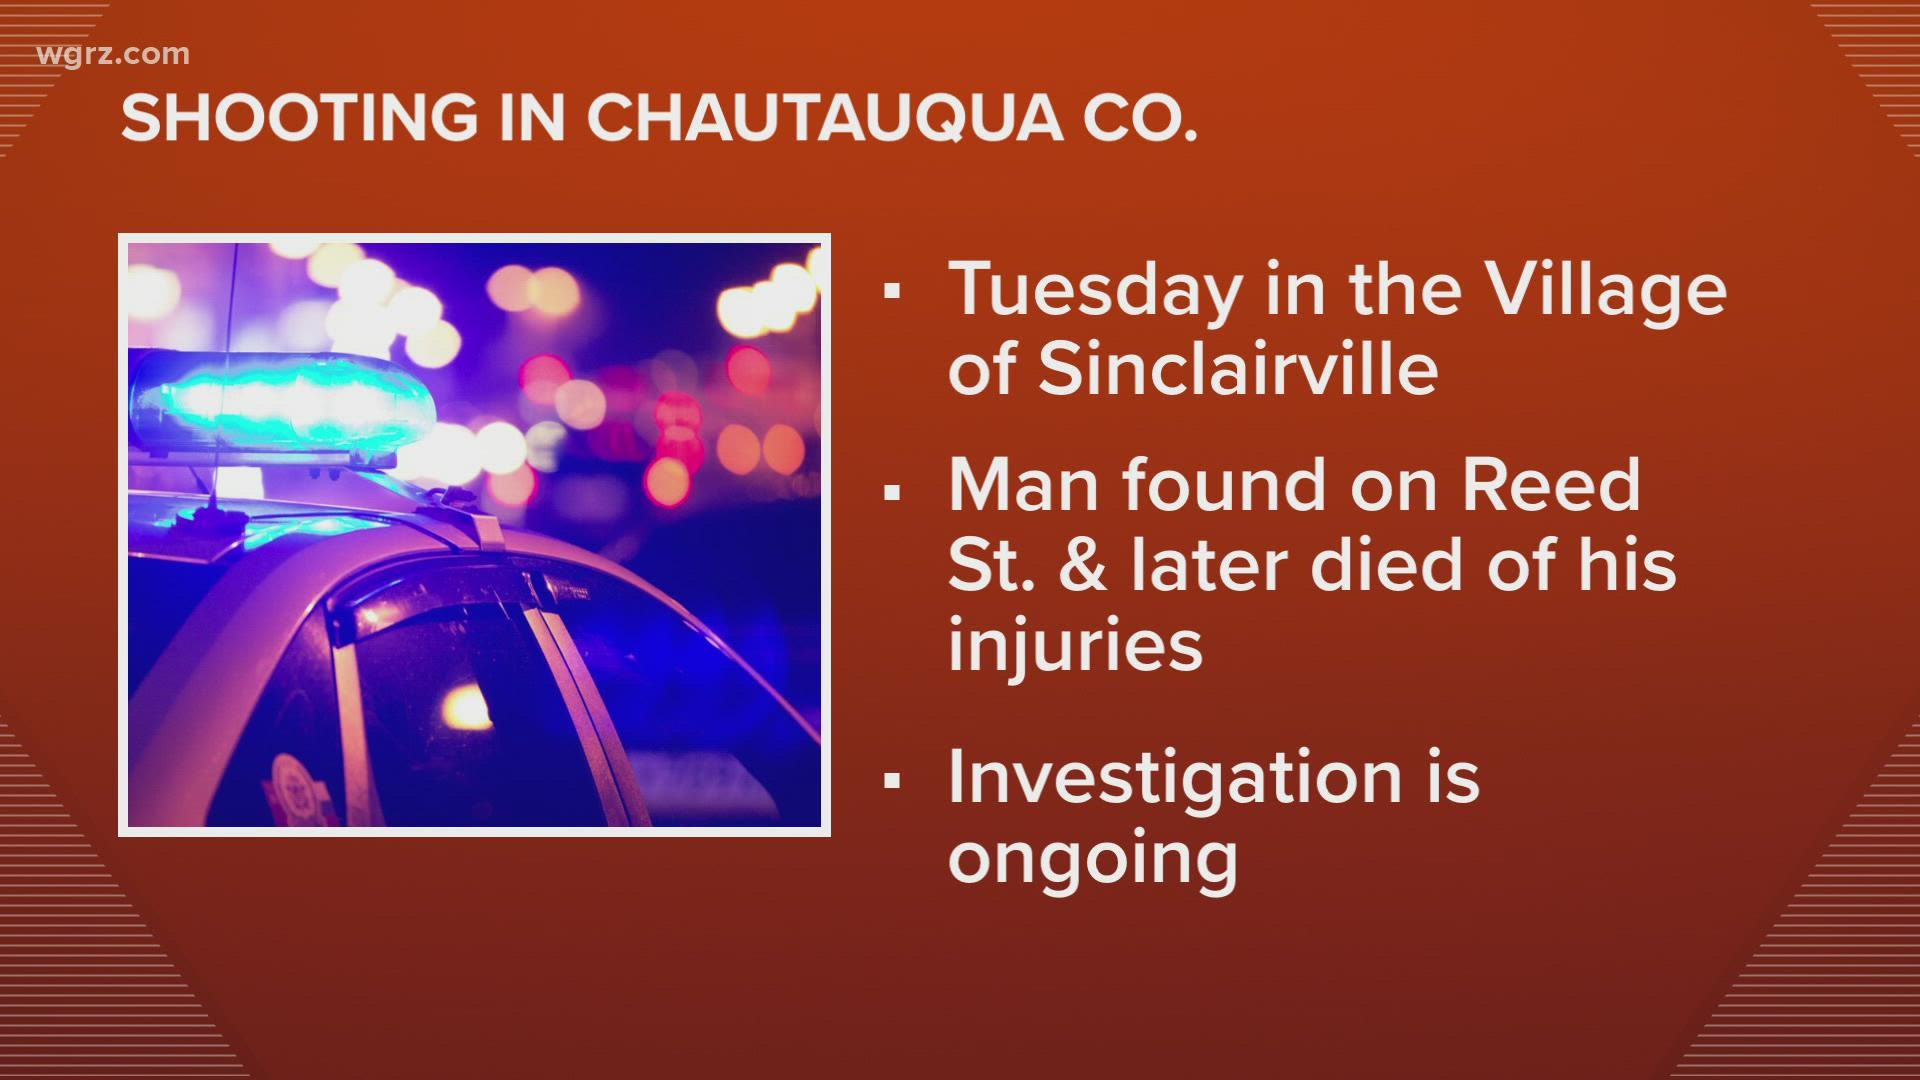 The Chautauqua County Sheriff's Office is investigating a shooting that happened in the Village of Sinclairville.